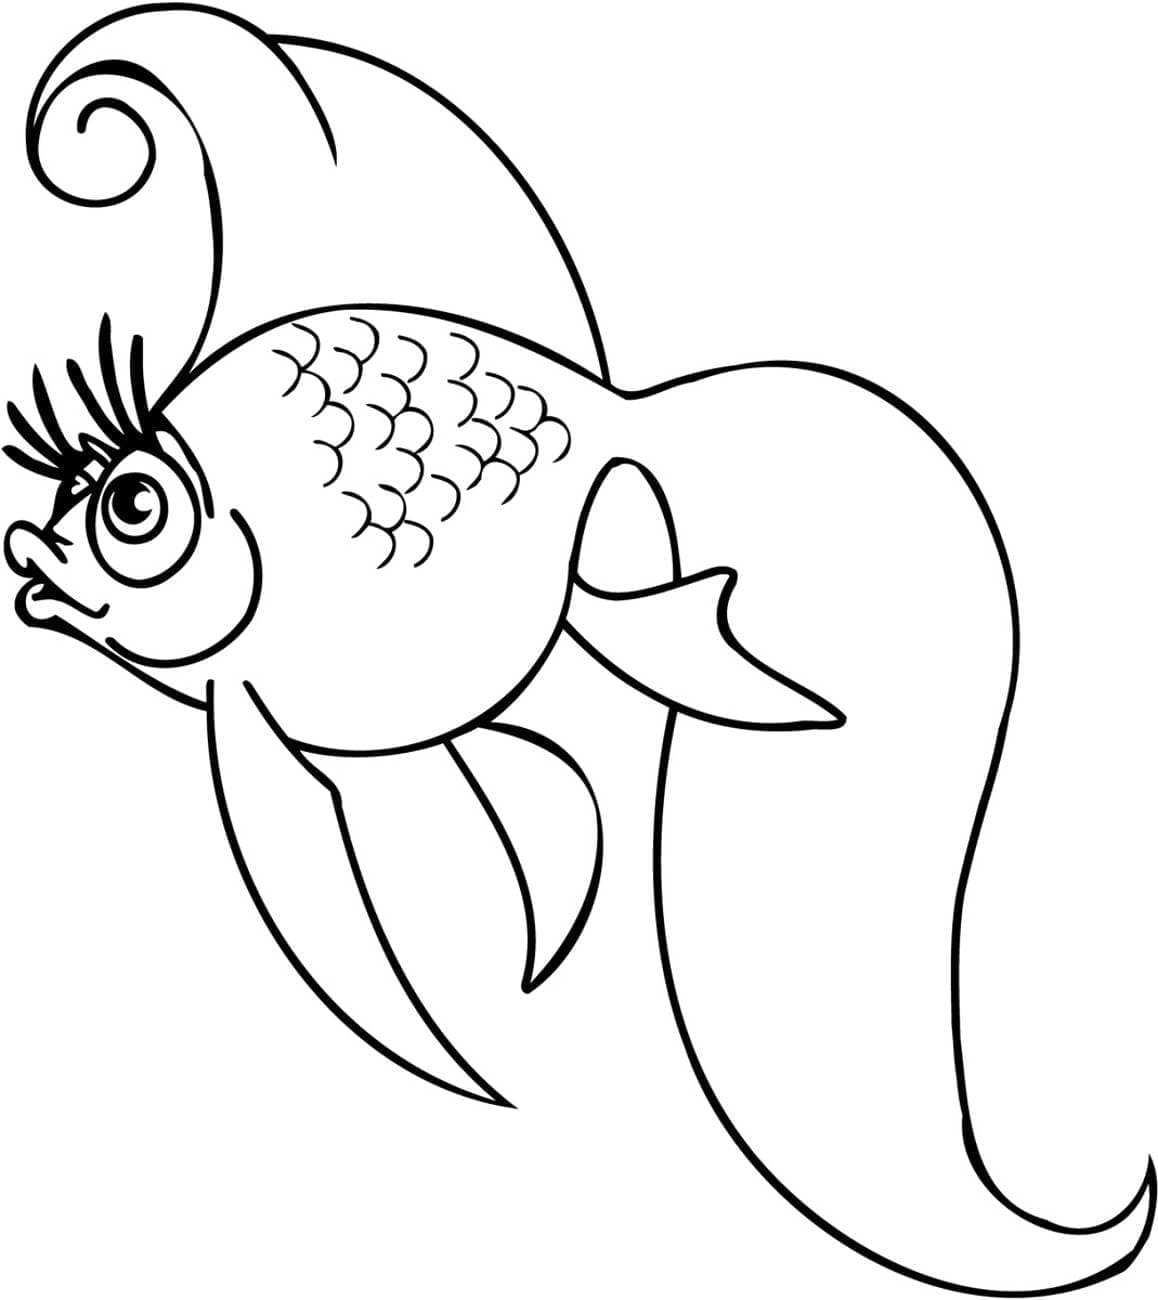 Adorable Poisson Rouge coloring page